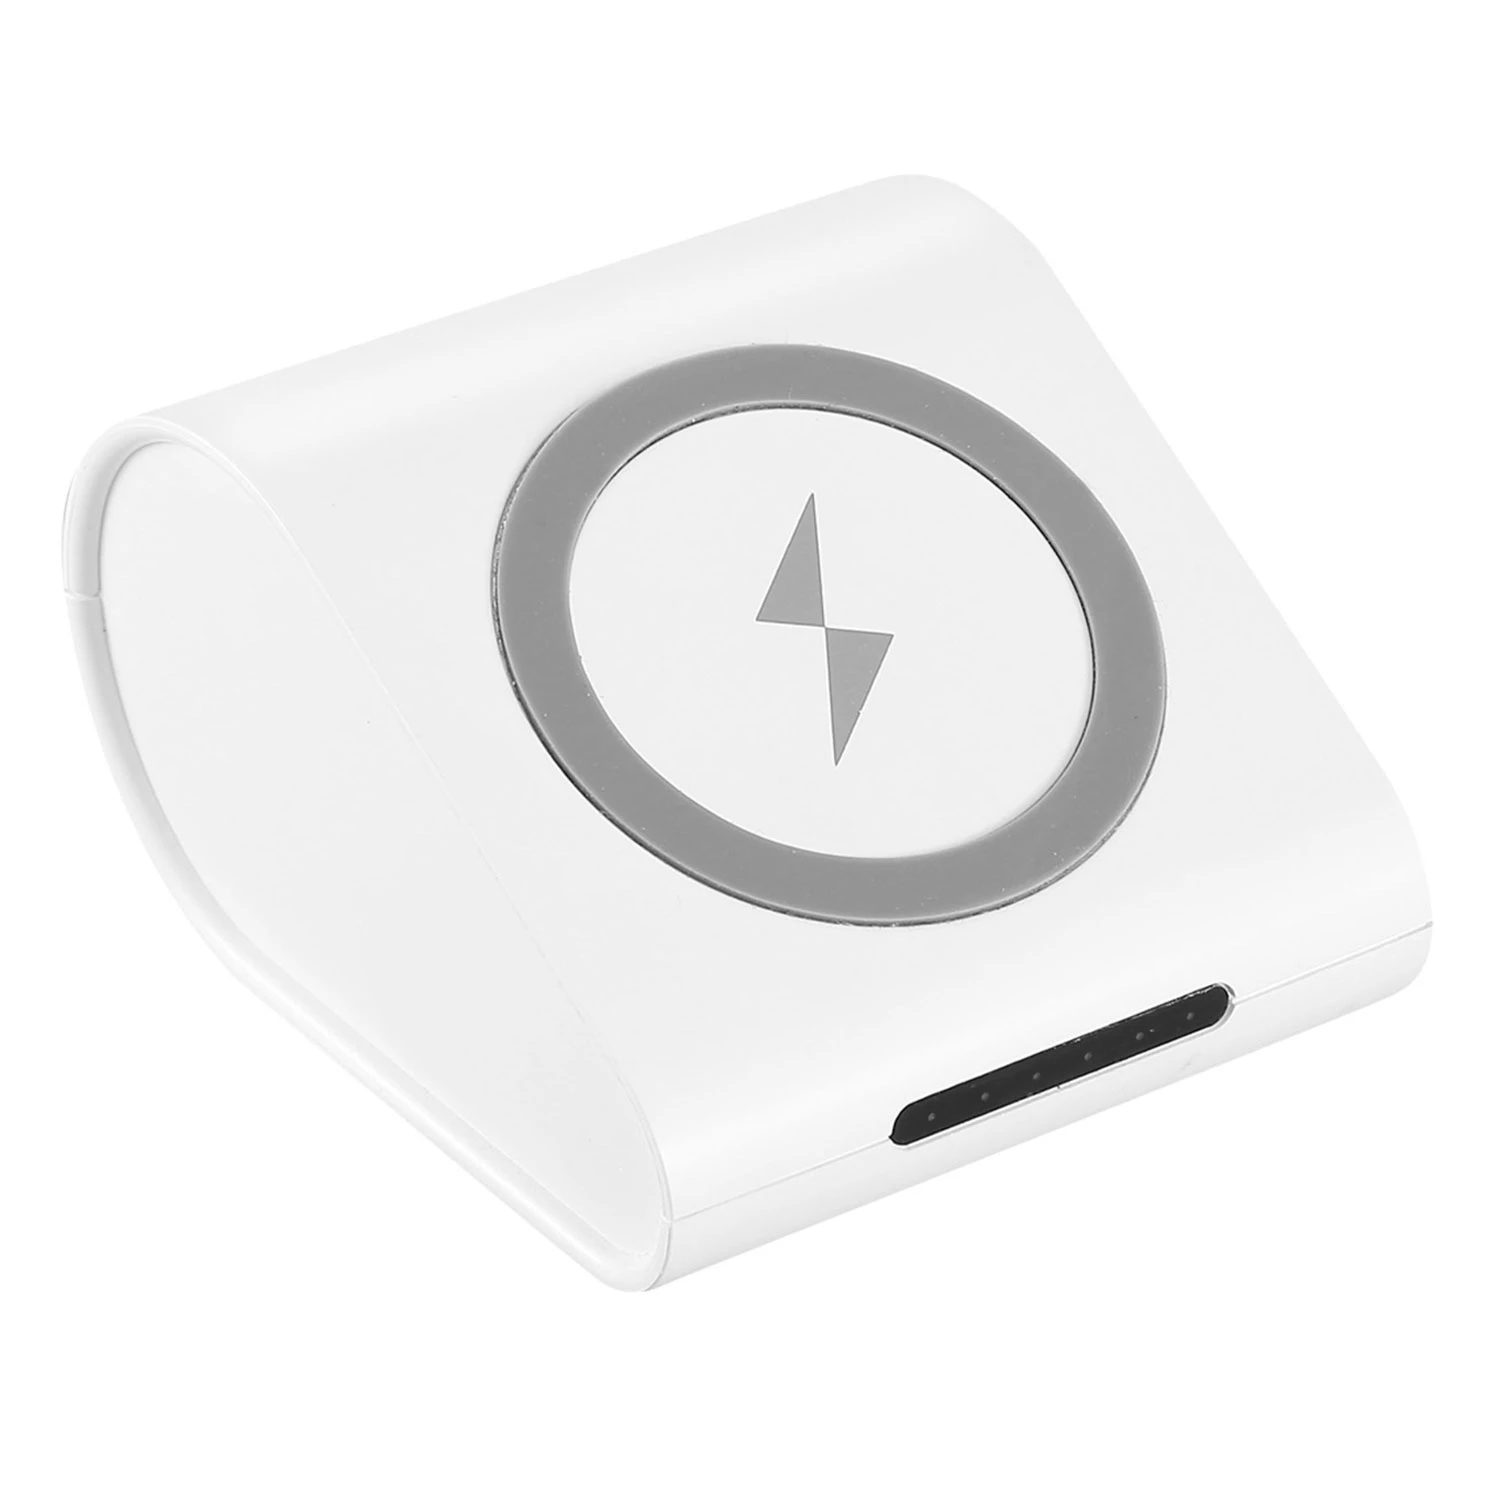 Wireless Charger Power Bank - 10400mAh, 5W Pad, 2.1A USB Port 